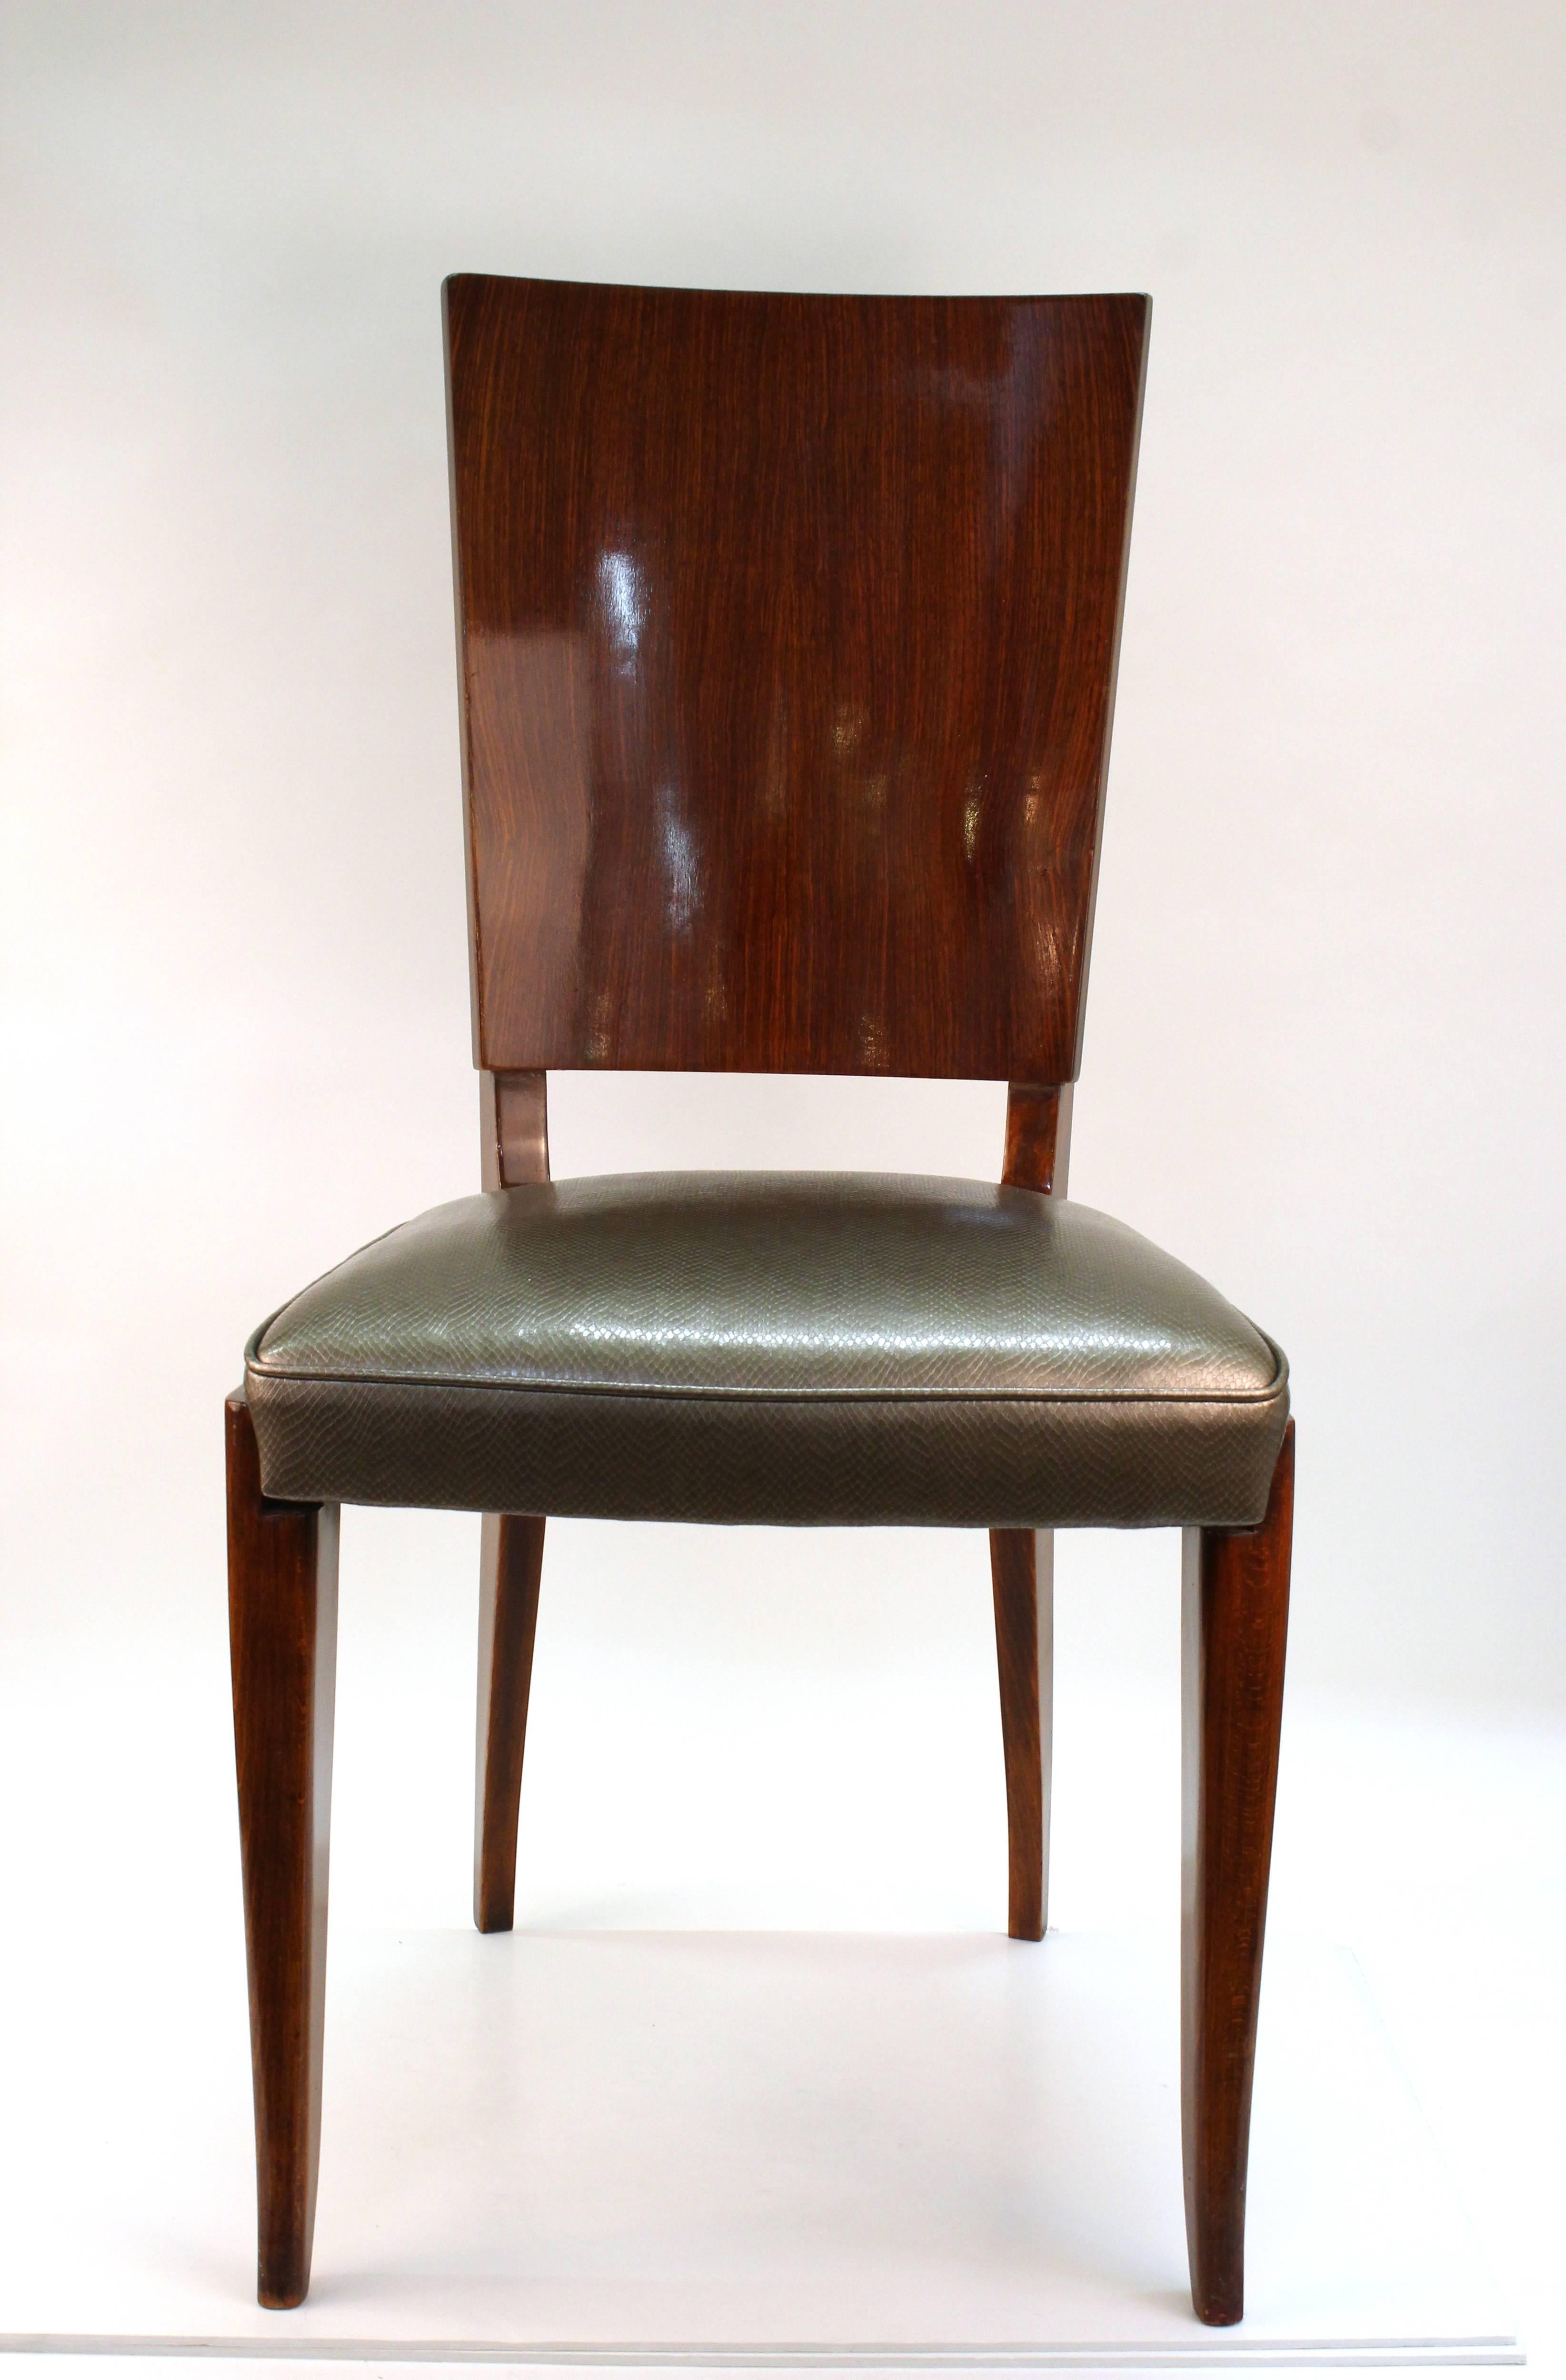 A set of six dining chairs from the Art Deco period, made of rosewood. The set has recently reupholstered seats in silver tone faux vinyl snakeskin. In great vintage condition.